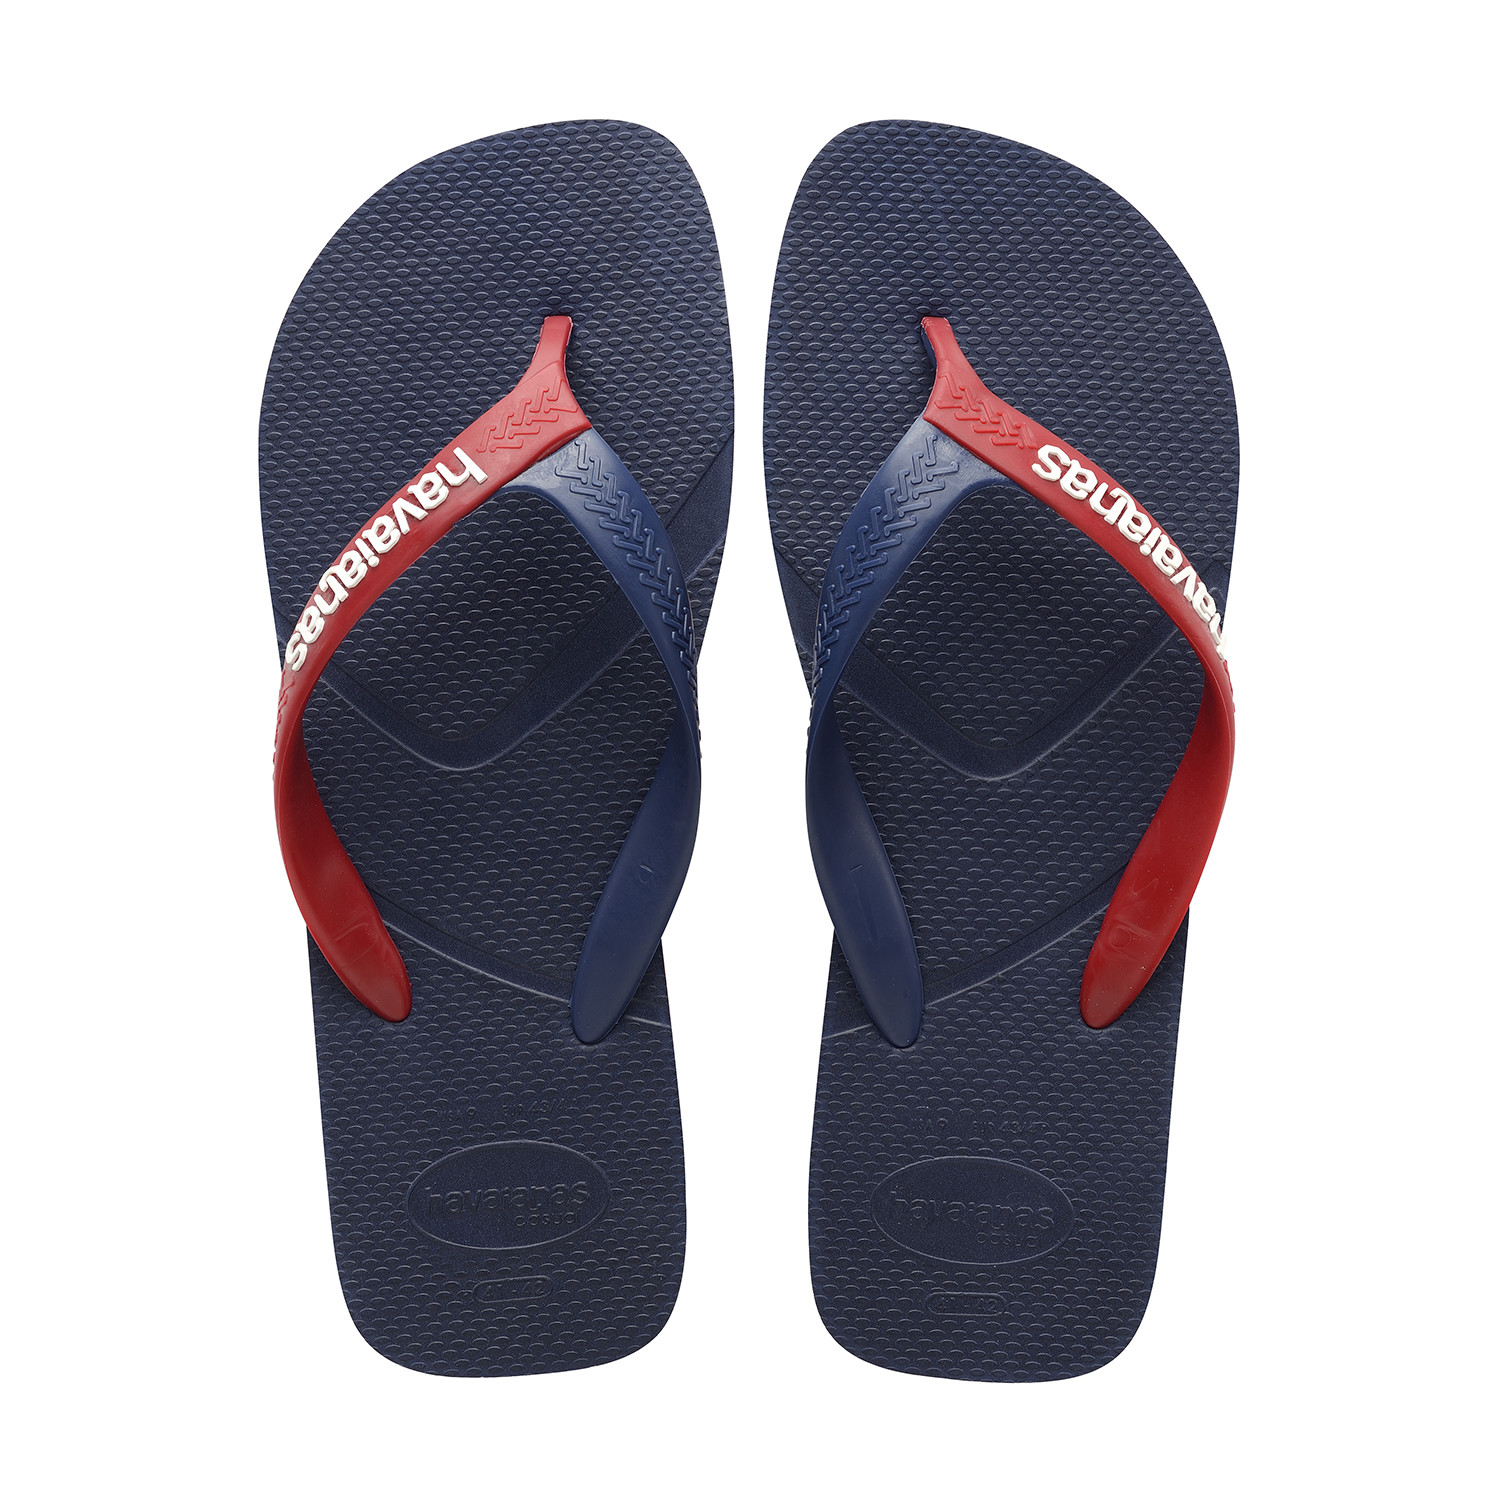 navy blue casual sandals